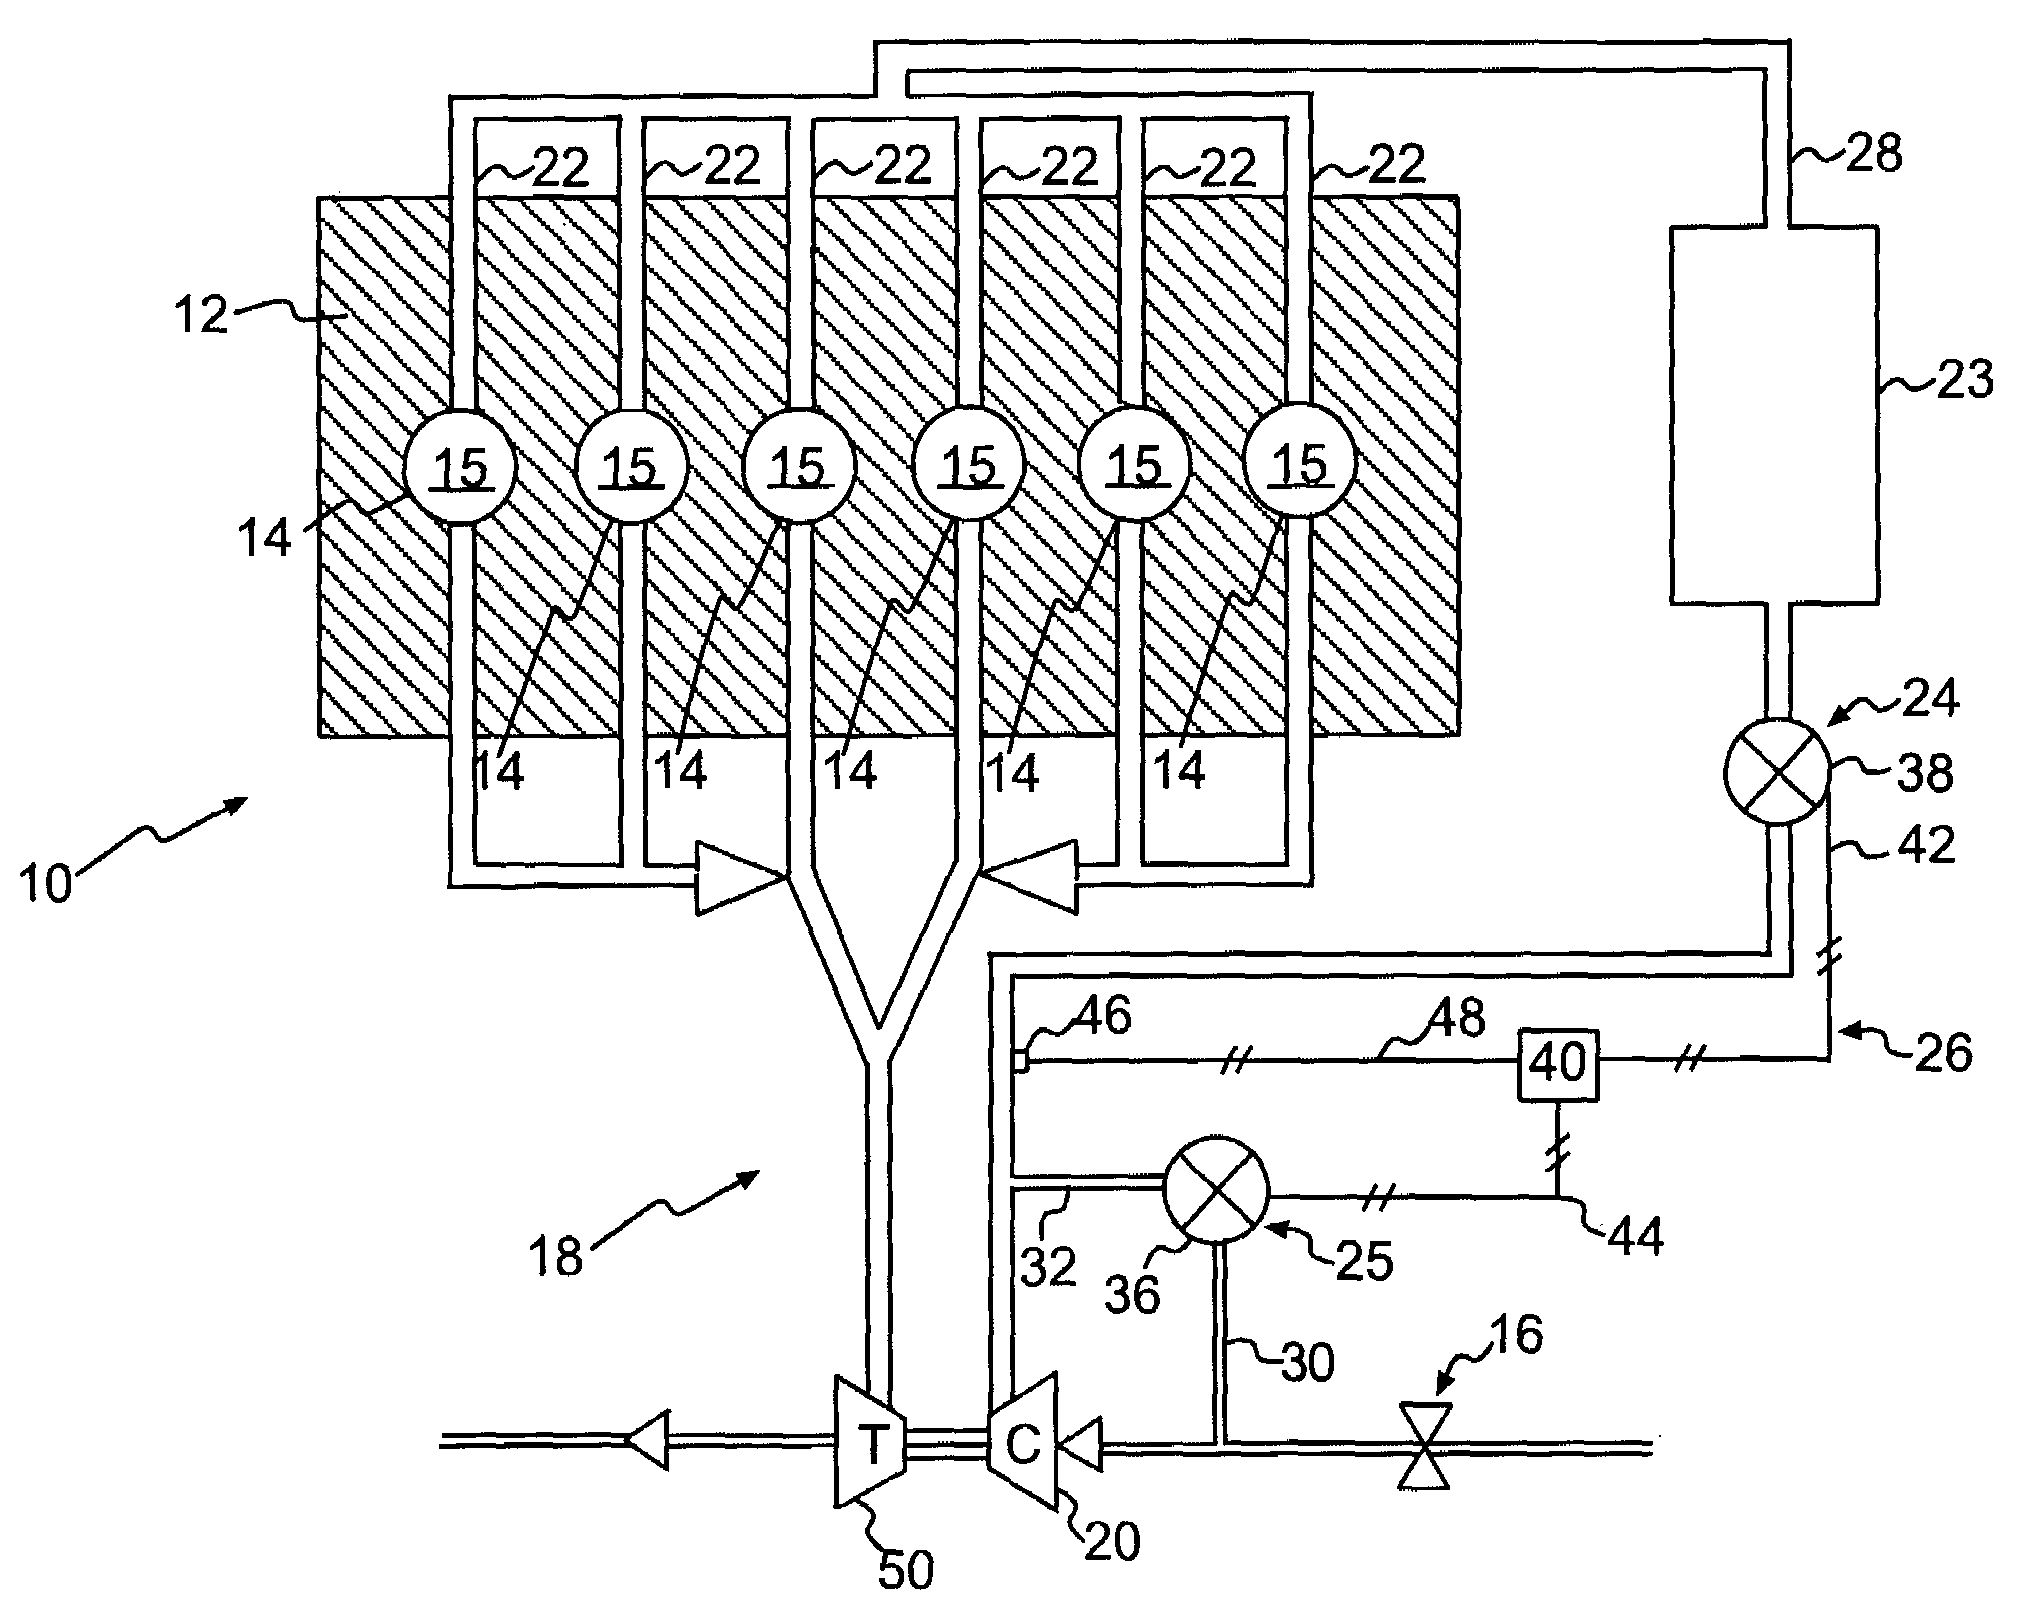 Air induction system having bypass flow control